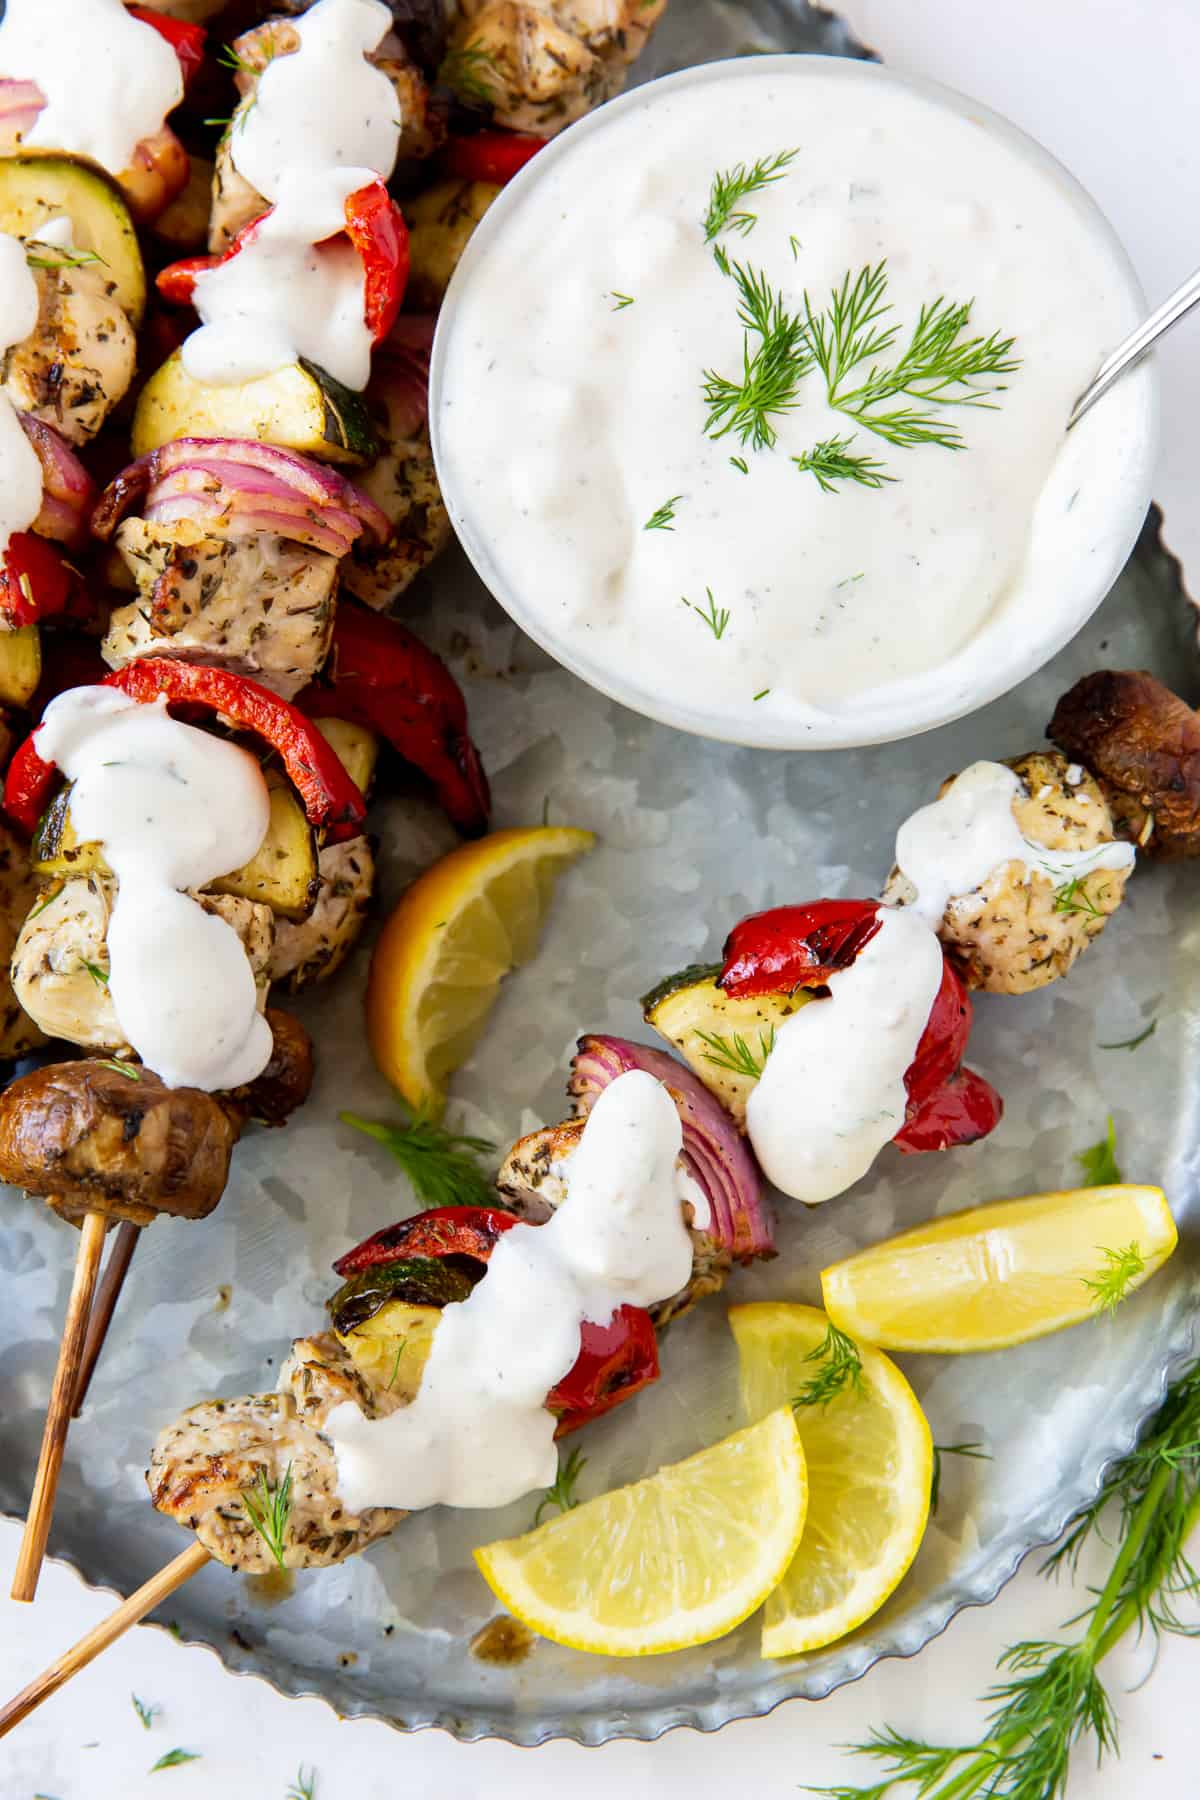 Greek Chicken Kabobs with Feta Dill Sauce spooned over the top.